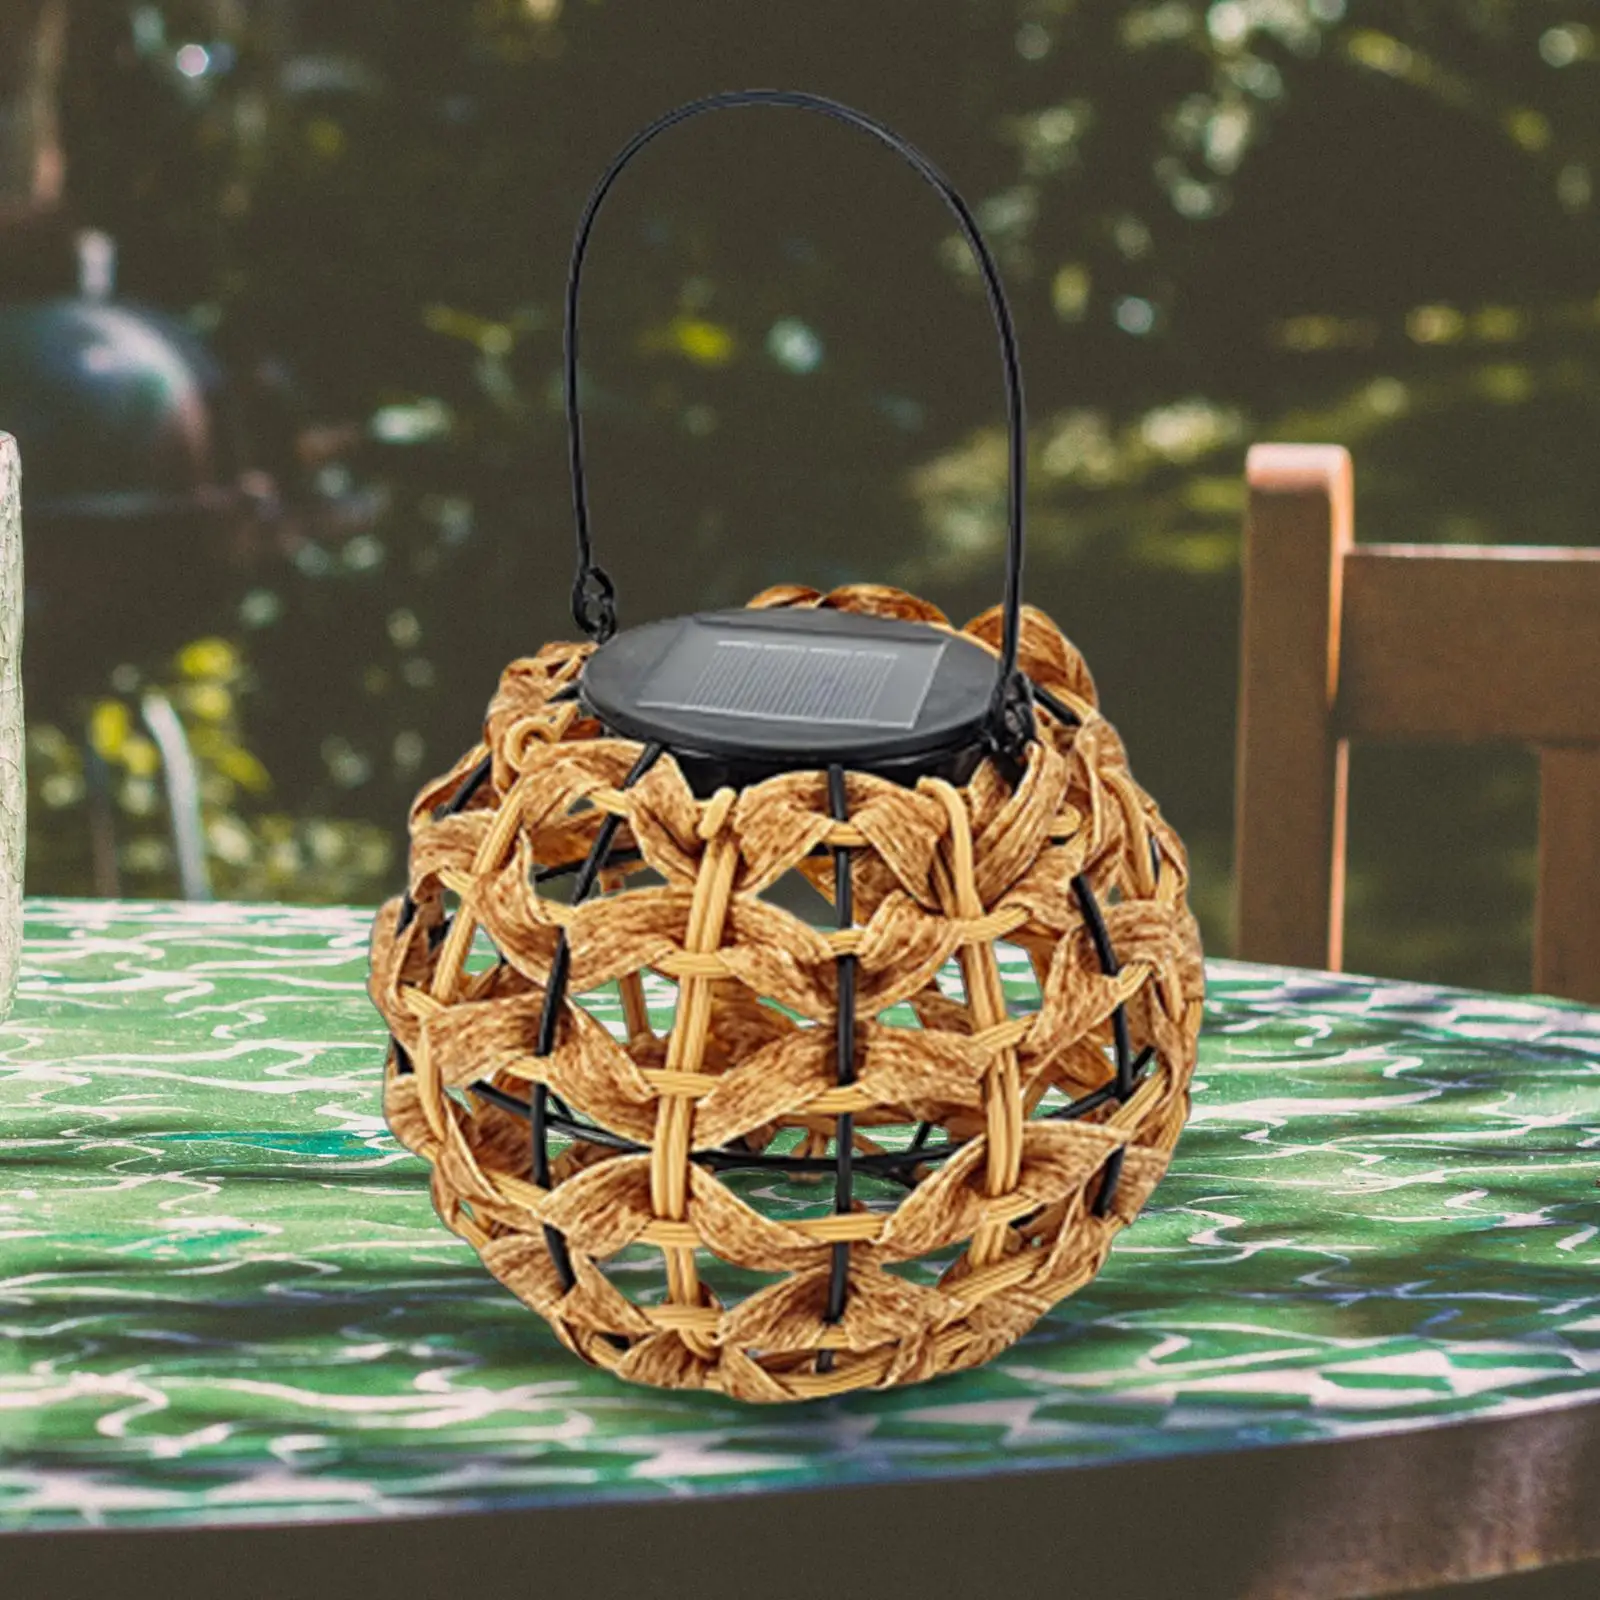 Solar Power Lights Rustic with Handle Outdoor Solar Lanterns Hanging Lantern Lamps for Courtyard Home Decoration Porch Balcony